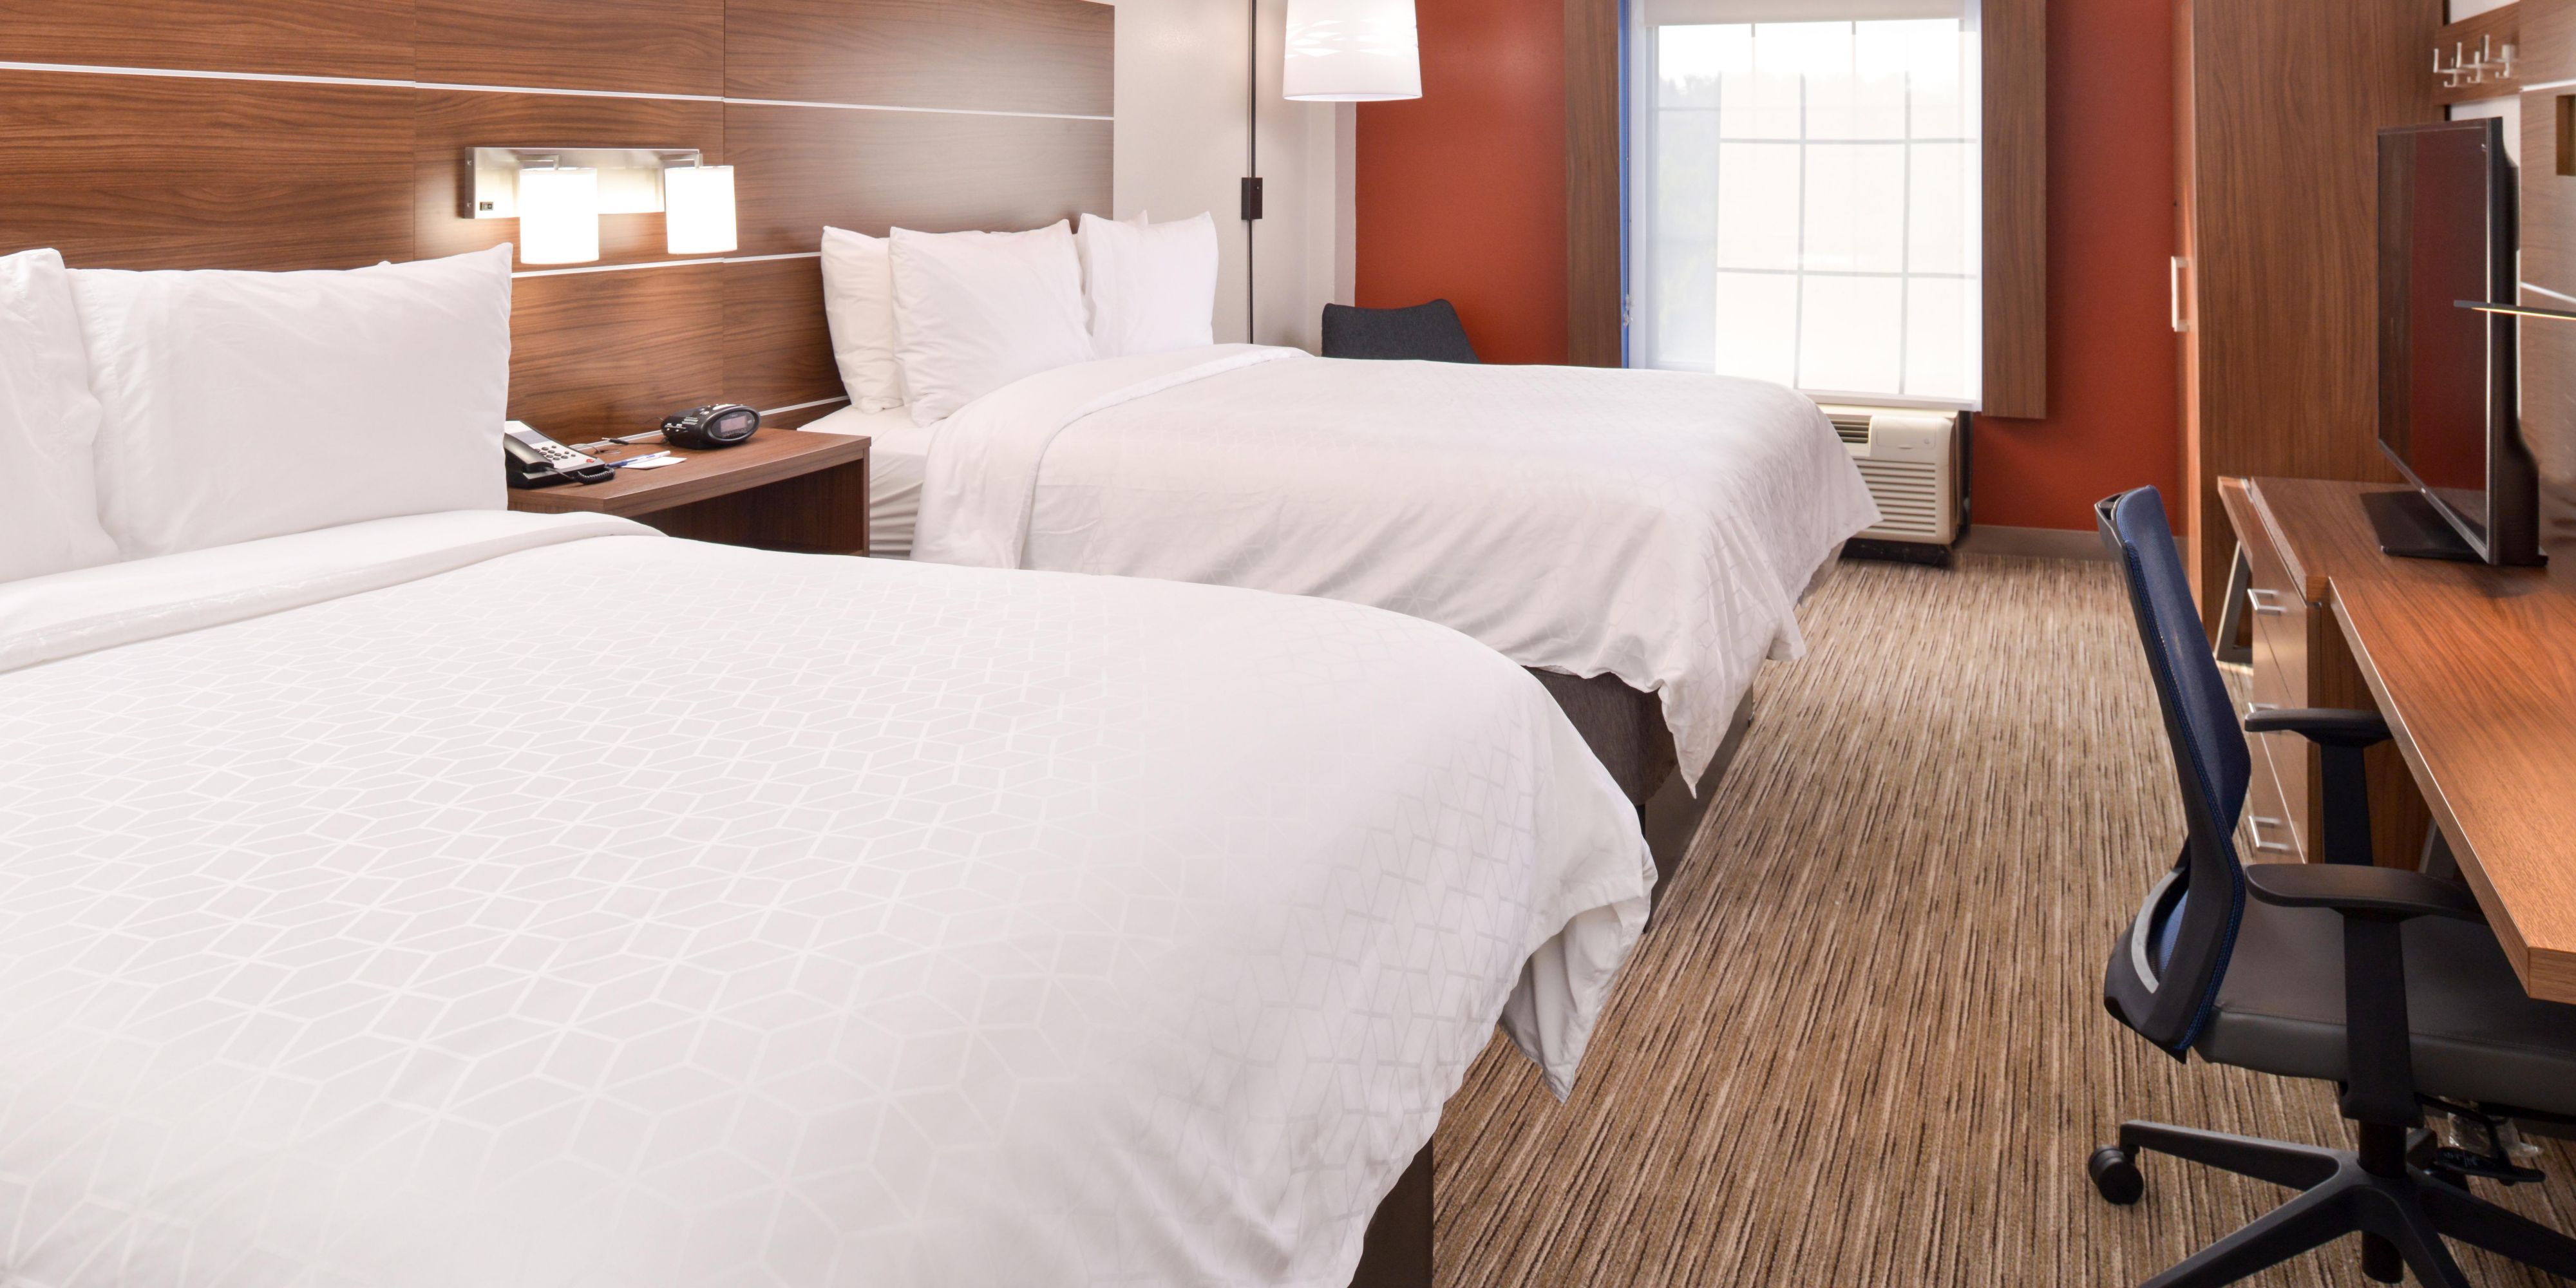 Whether you need a break from city life or a quick vacation with the kids, staycation with us this summer. Breakfast is free and our brand new suites offer ample room for you and your family to spread out and relax. 